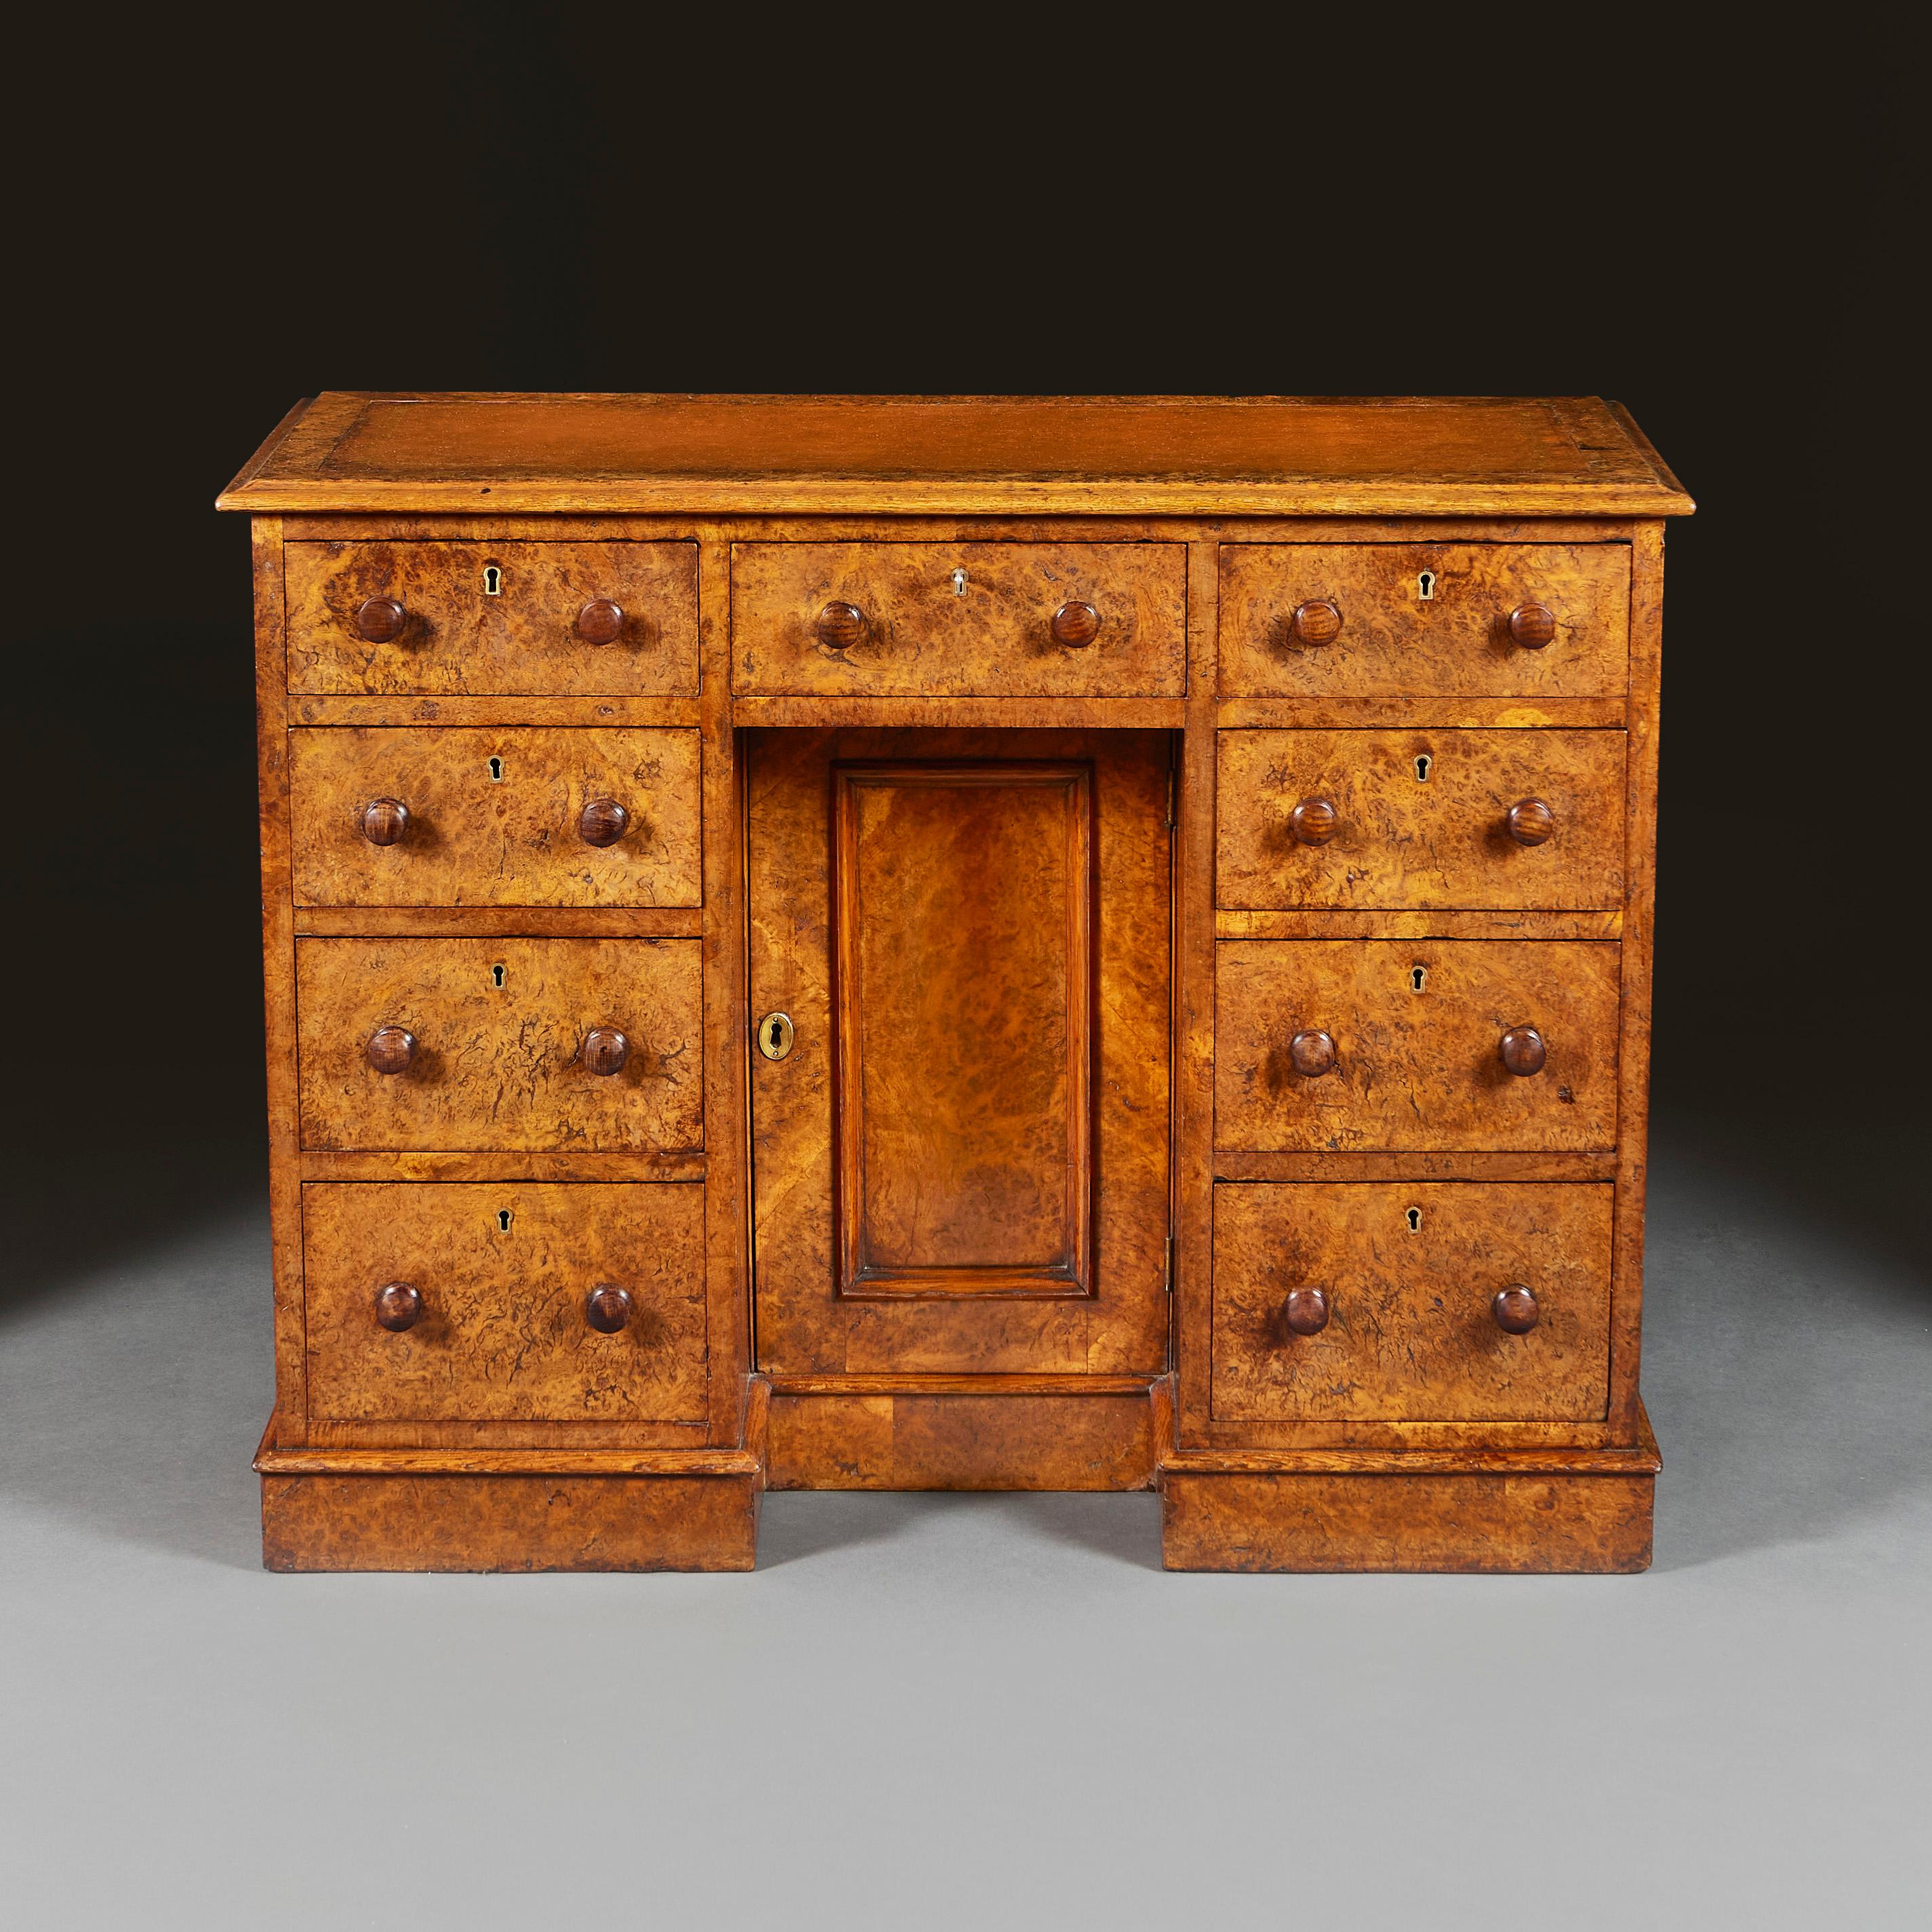 England, circa 1880

A late 19th century burr oak kneehole desk, opening with nine drawers to the front, with central cupboard, the top with leather writing surface with gilt tooled border, the sides and back with moulded cartouches.

Height